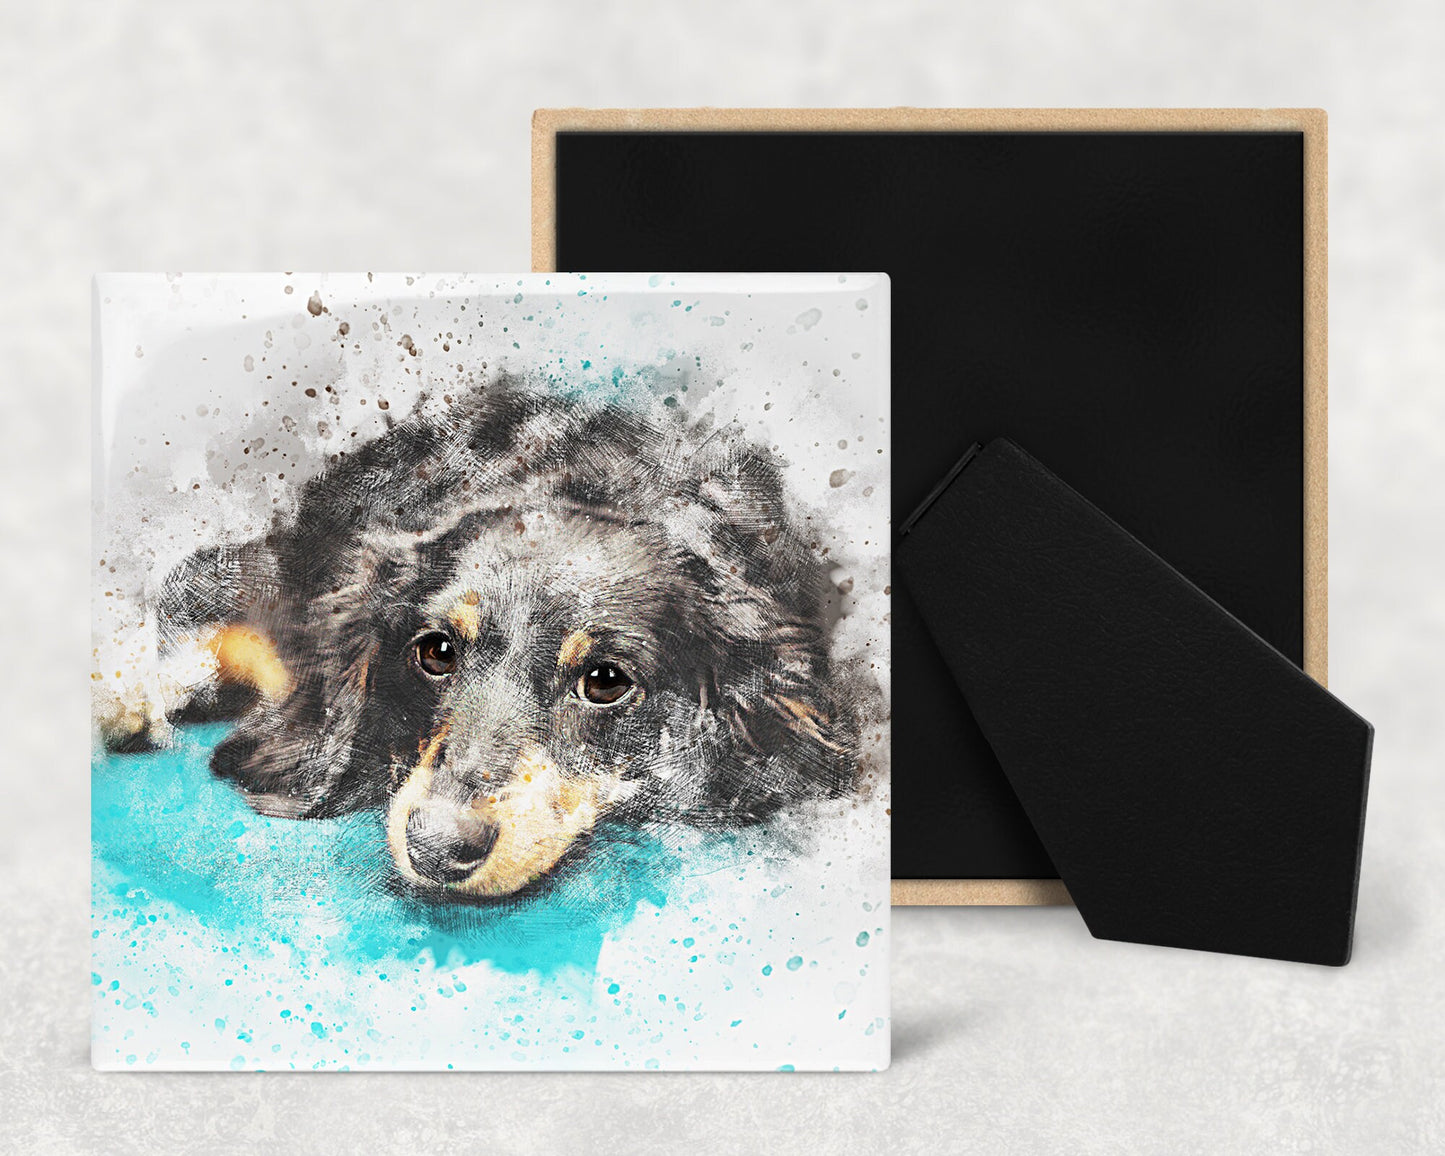 Watercolor Dachshund Art Decorative Ceramic Tile with Optional Easel Back - Available in 3 Sizes